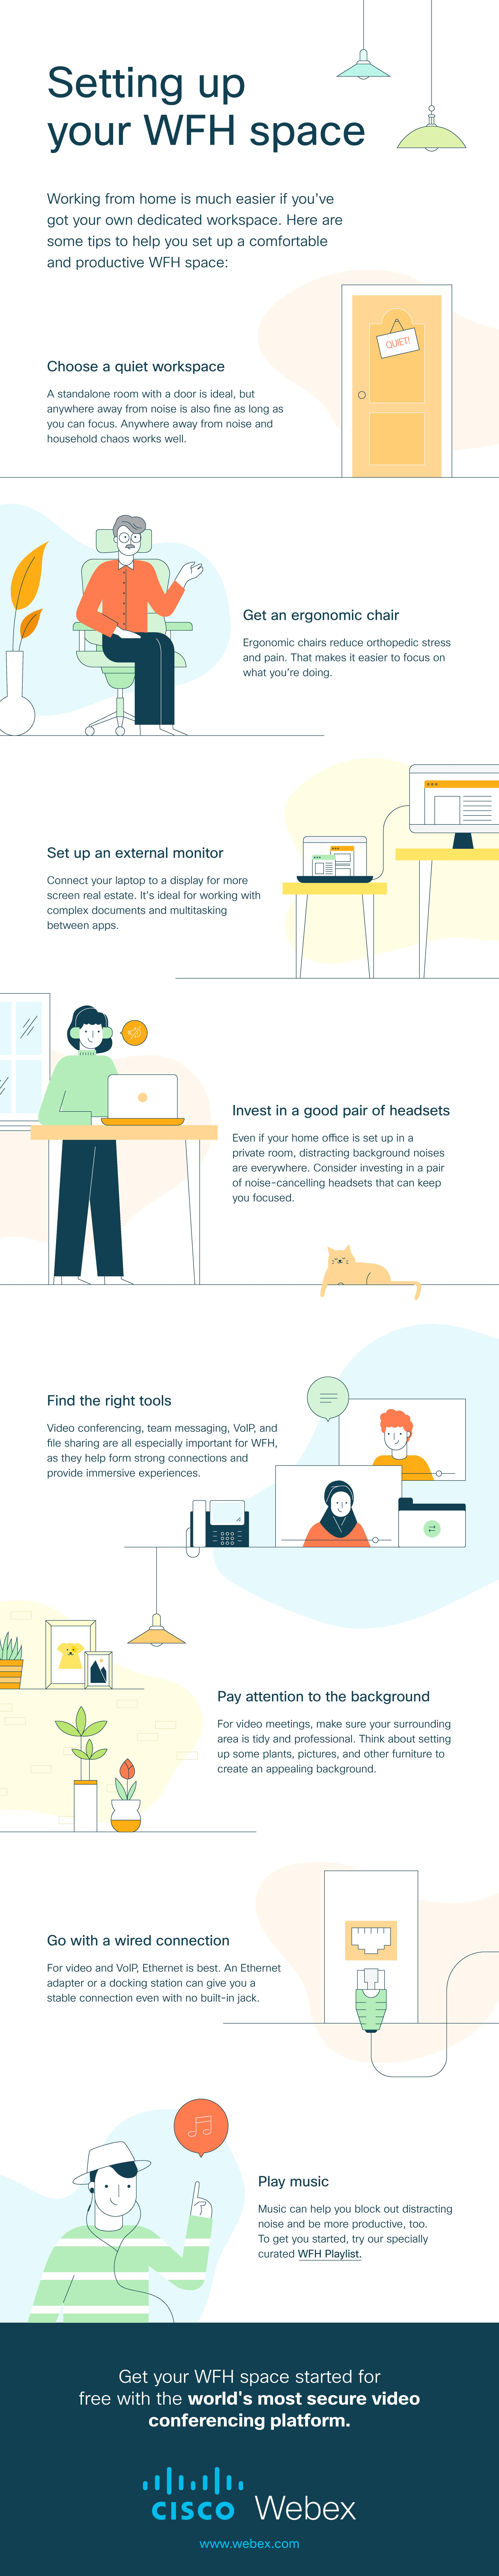 Setting up Your Work From Home Space [Infographic]